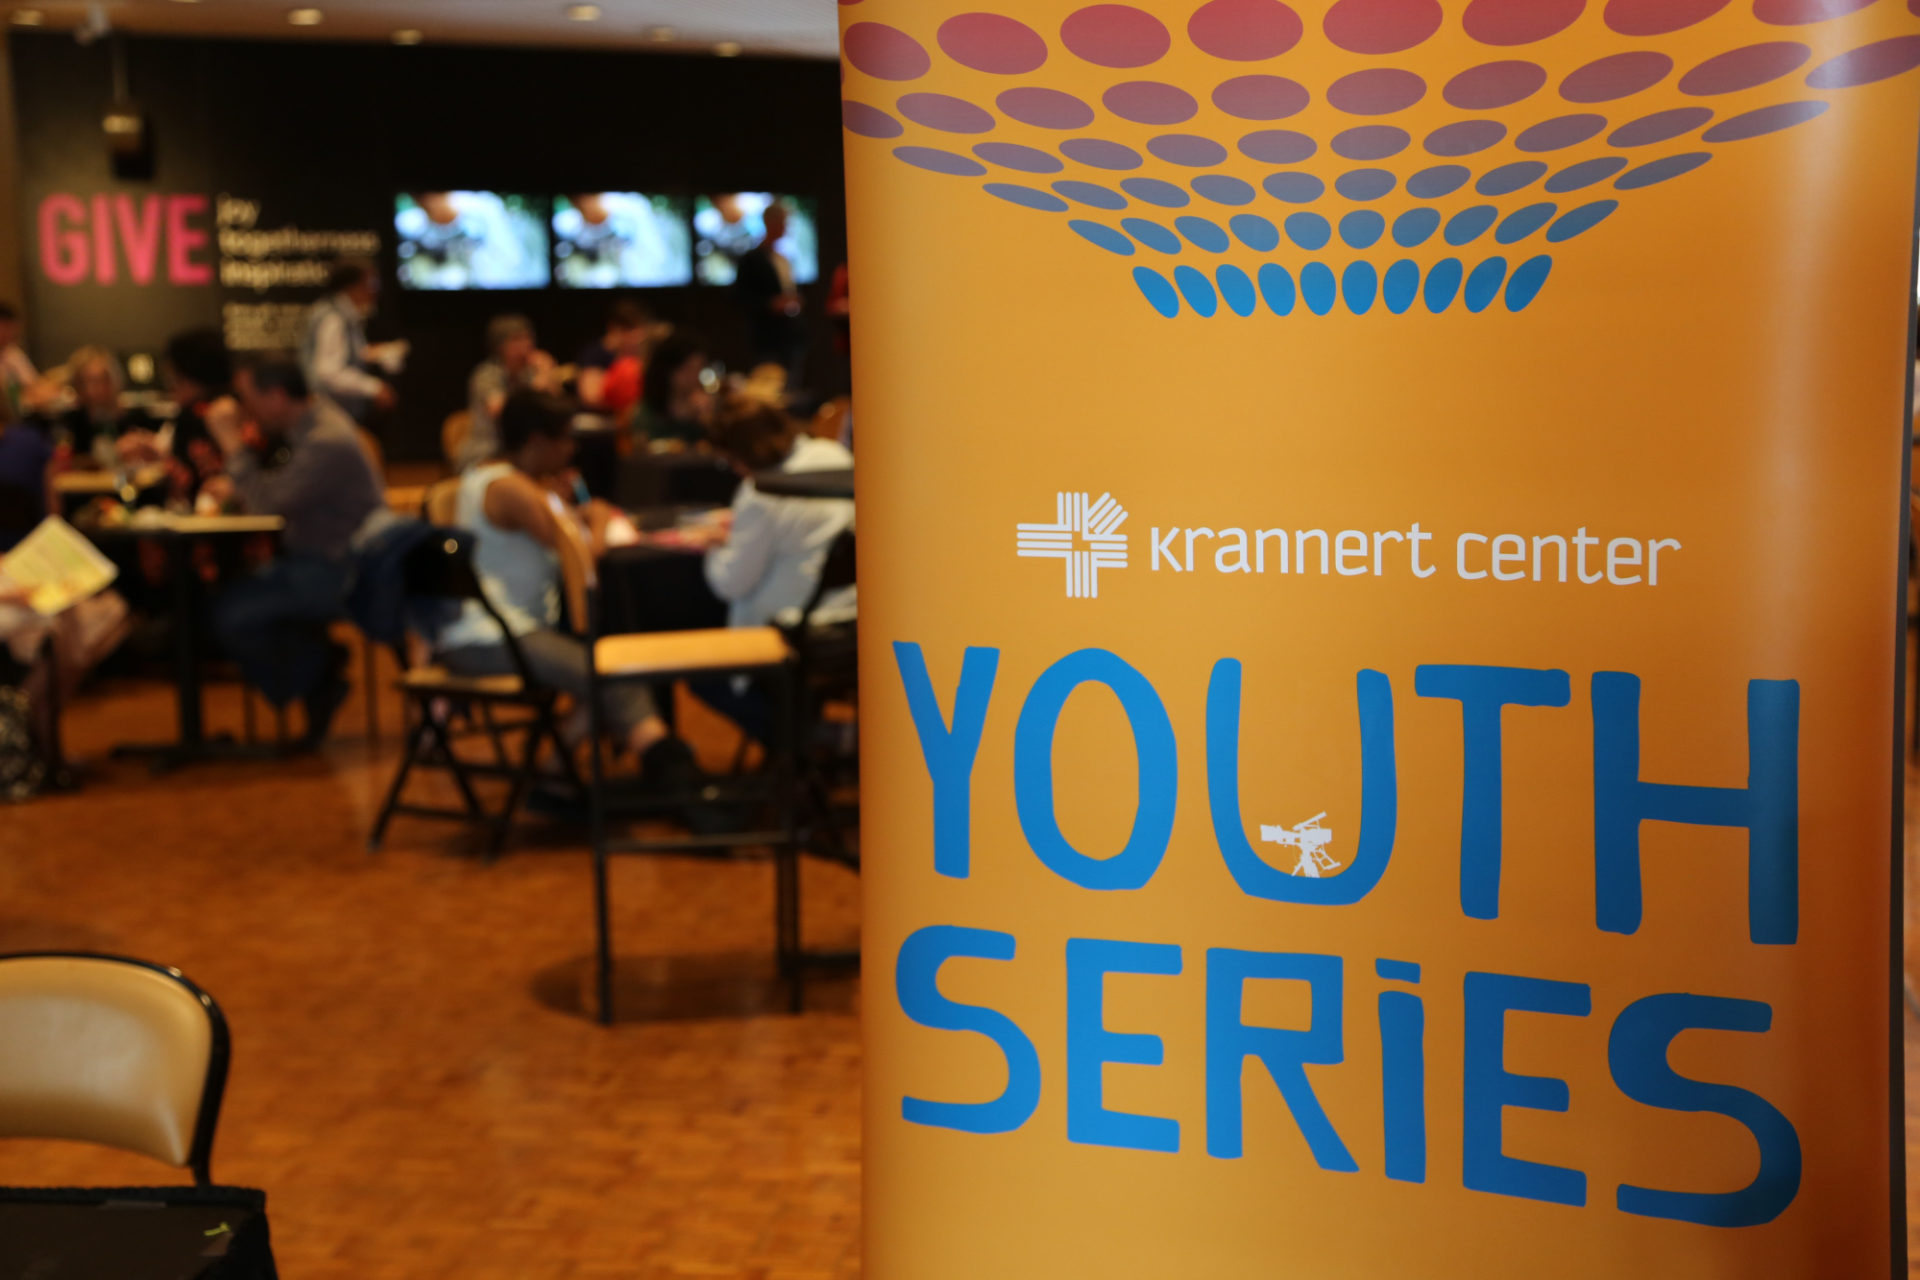 A yellow banner with the words "Krannert Center Youth Series" in white and blue text. The banner is in a room with a parquet wood floor, chairs, and tables. There is an out-of-focus accent wall in the back, with the word "give" in red or pink text on a black wall.